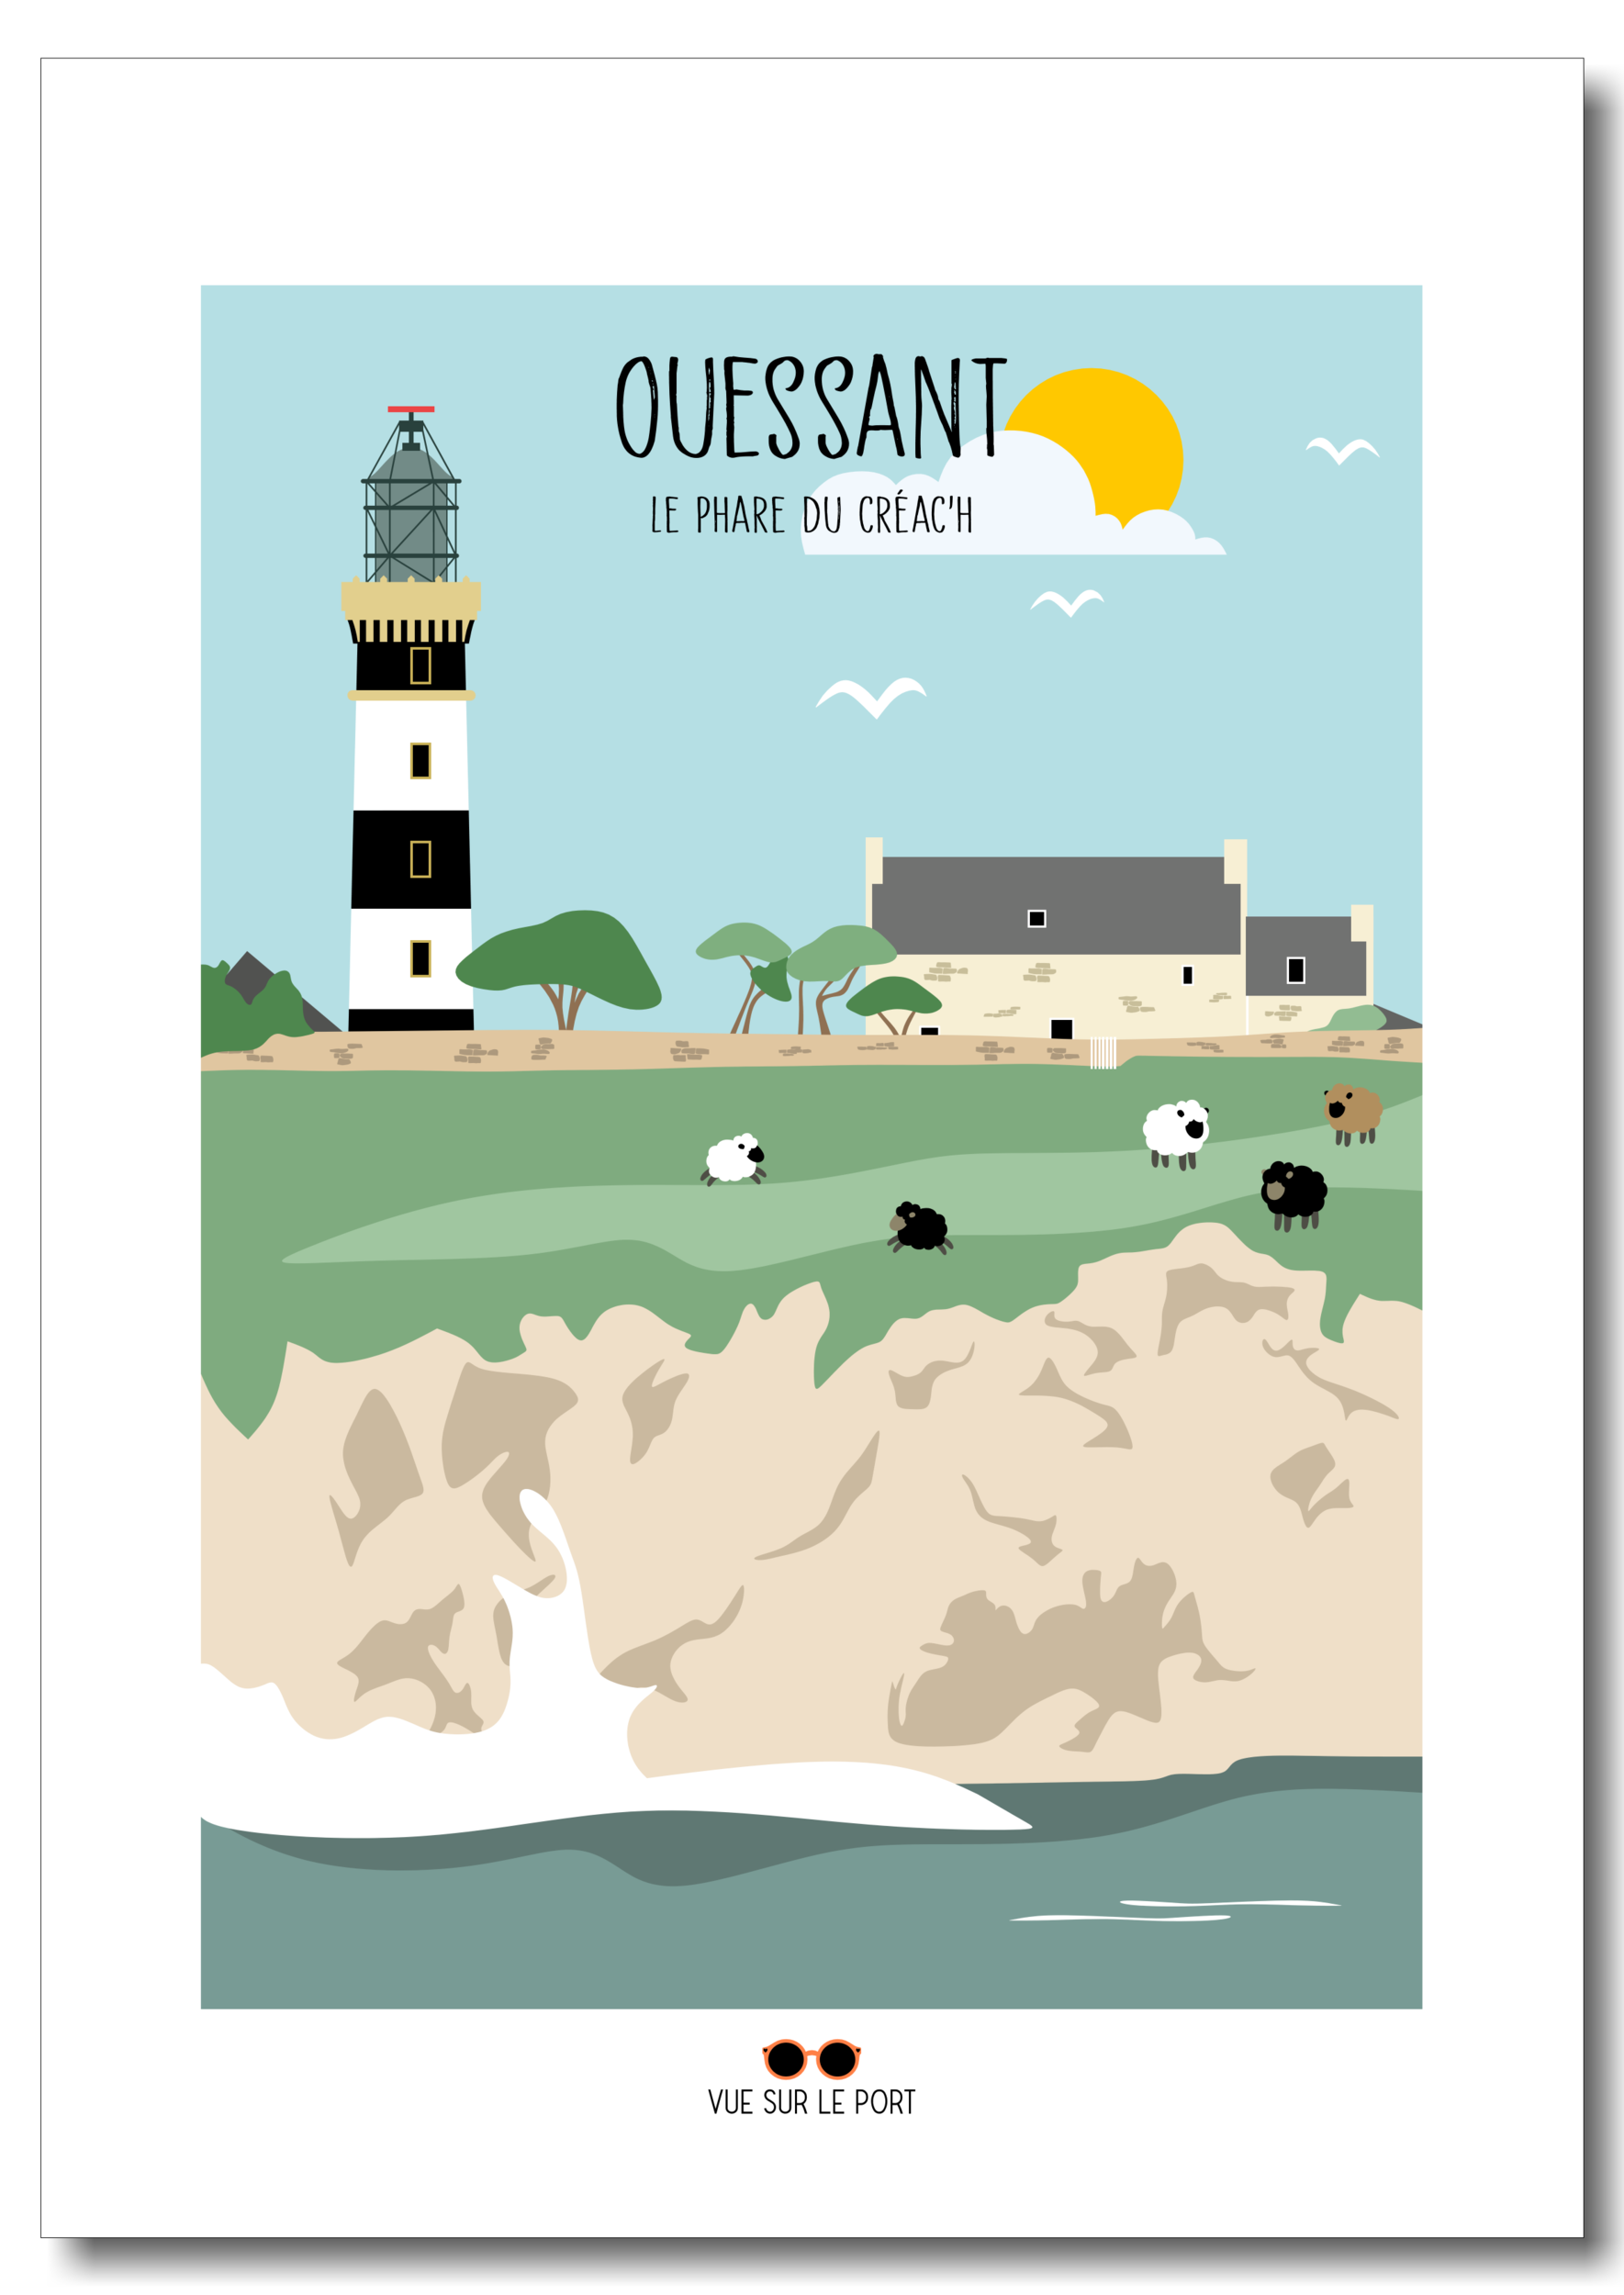 Ouessant etsy